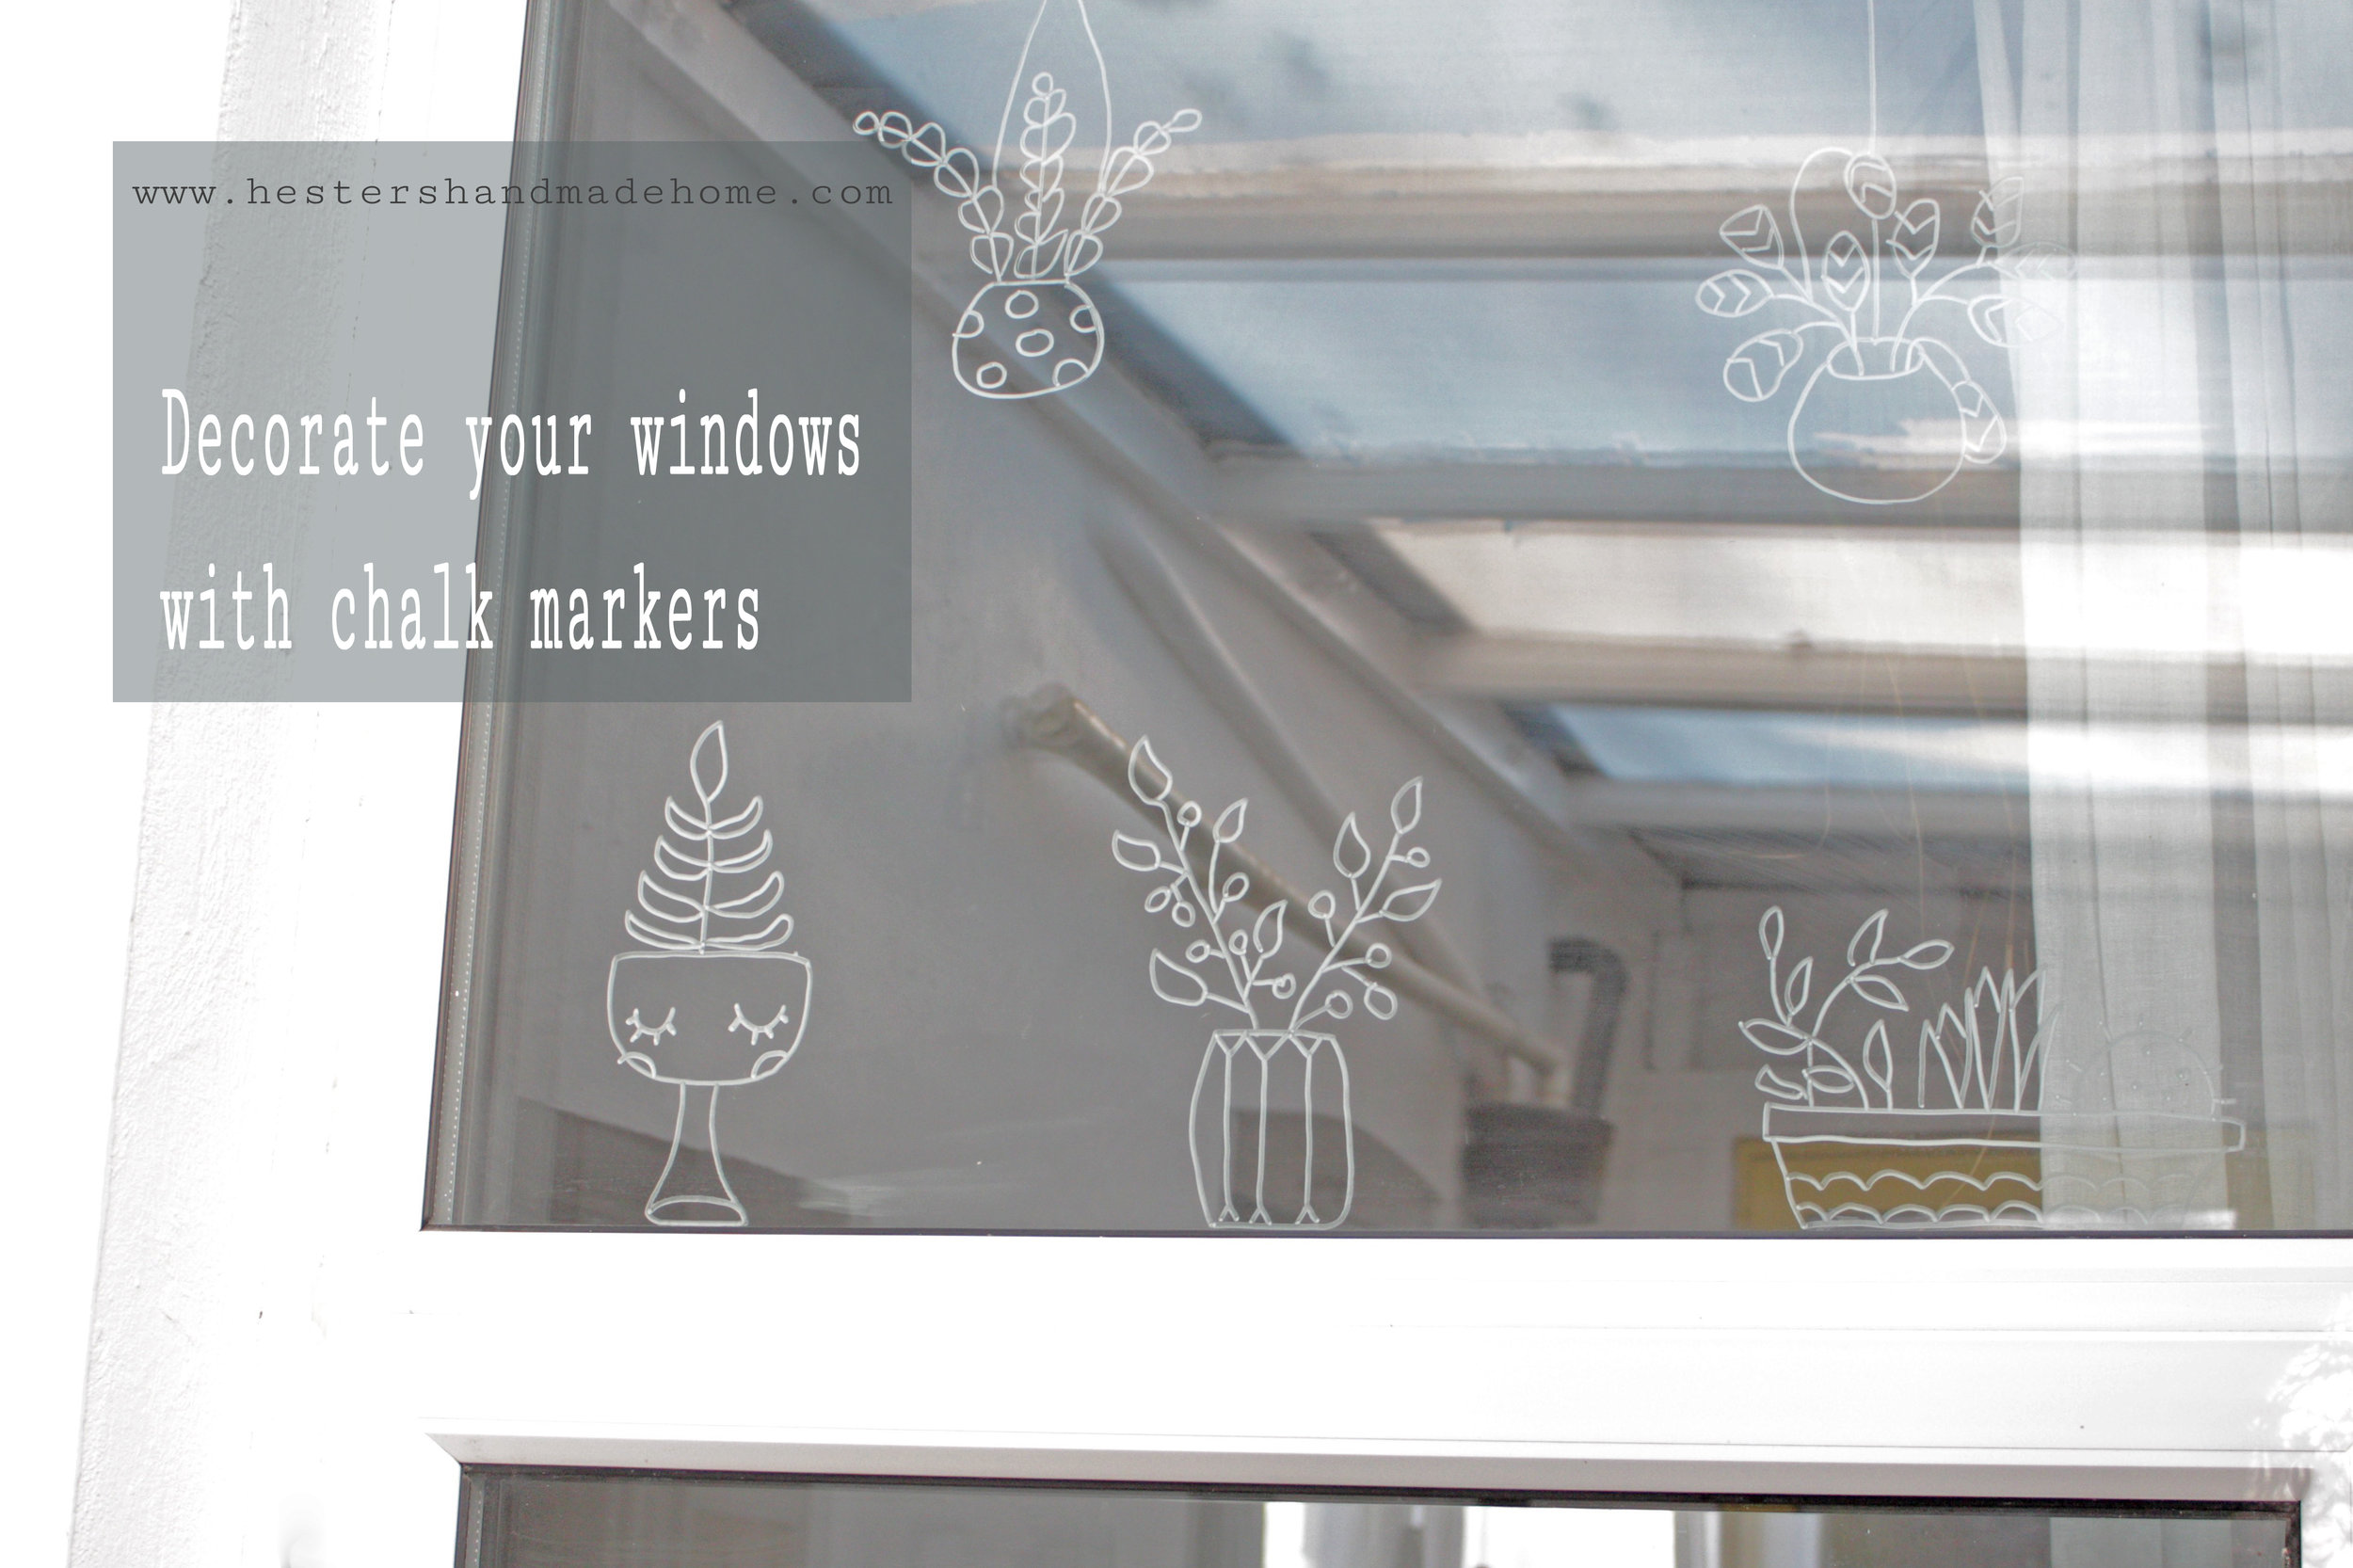 Decorate your windows with chalk markers — Hester's Handmade Home